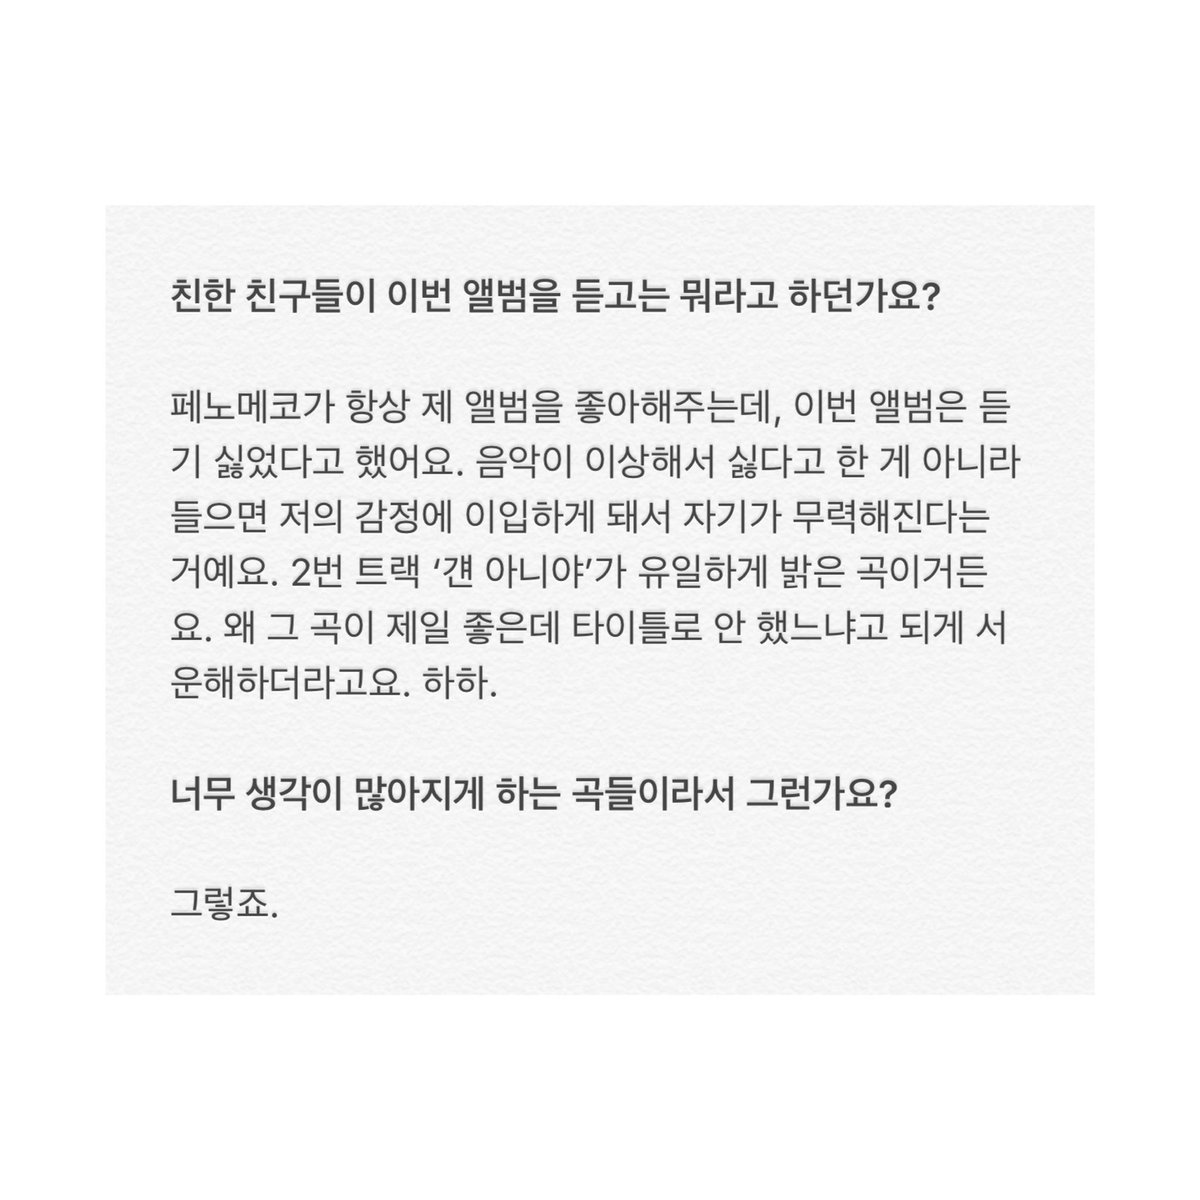 Grazia Korea November 2019 Interview with Zico“Penomeco always enjoys the music I make, but he said that he disliked this album. Not that the music was weird or what, but because he’d get immersed in my feelings while listening and feel helpless as a result.” #PENOMECO  #ZICO